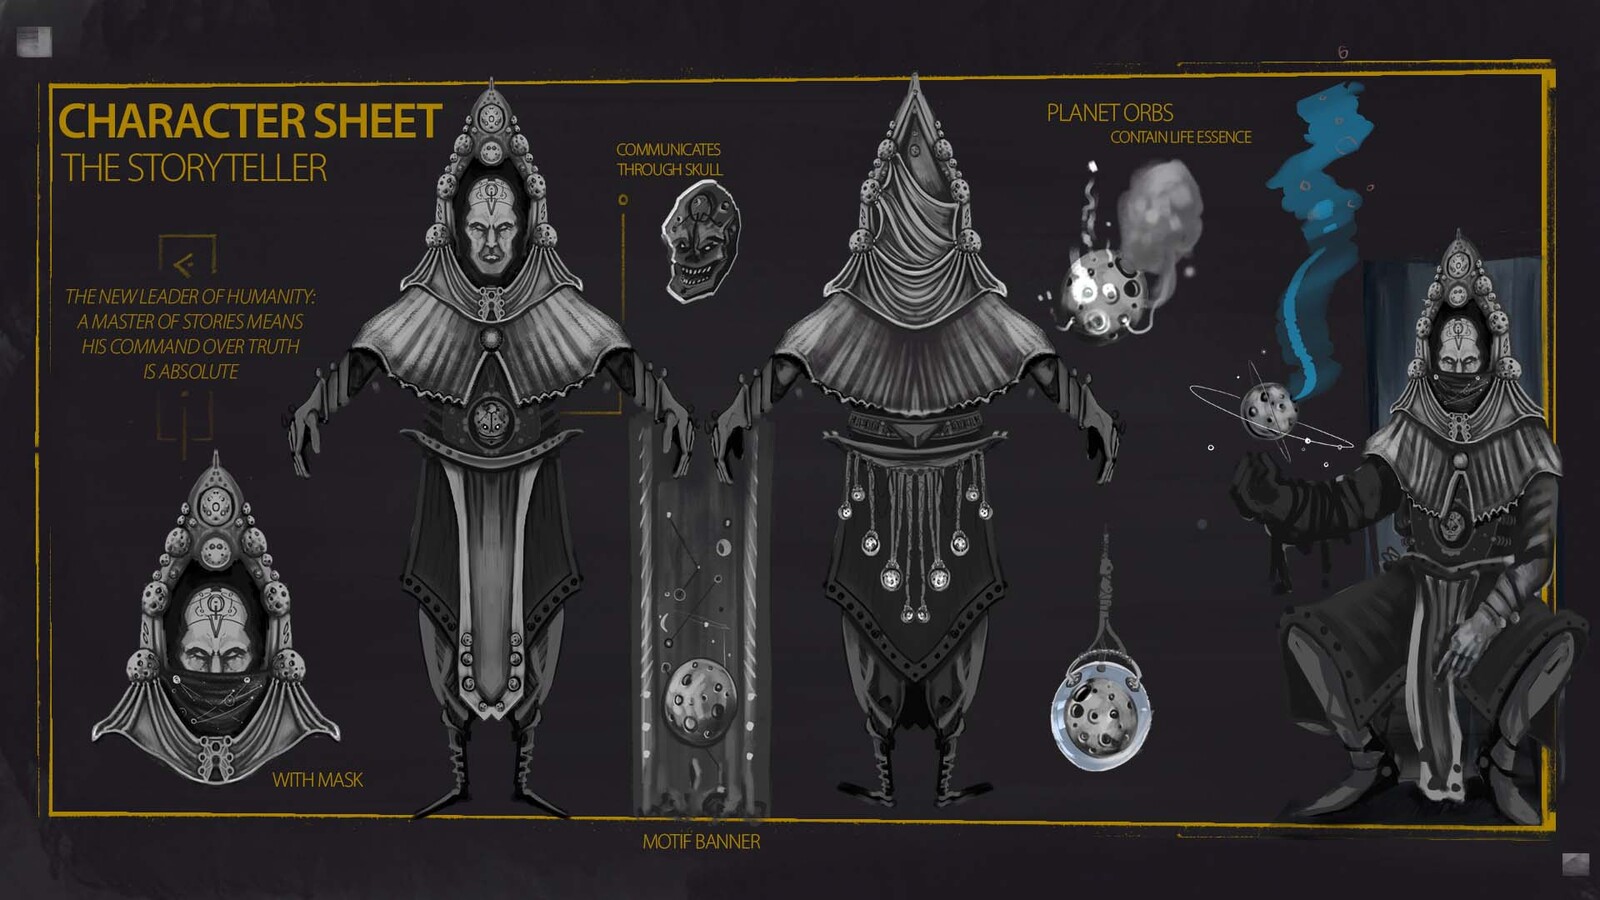 Storyteller Character Concept - the one that leads humanity into outer space through mastery of his message